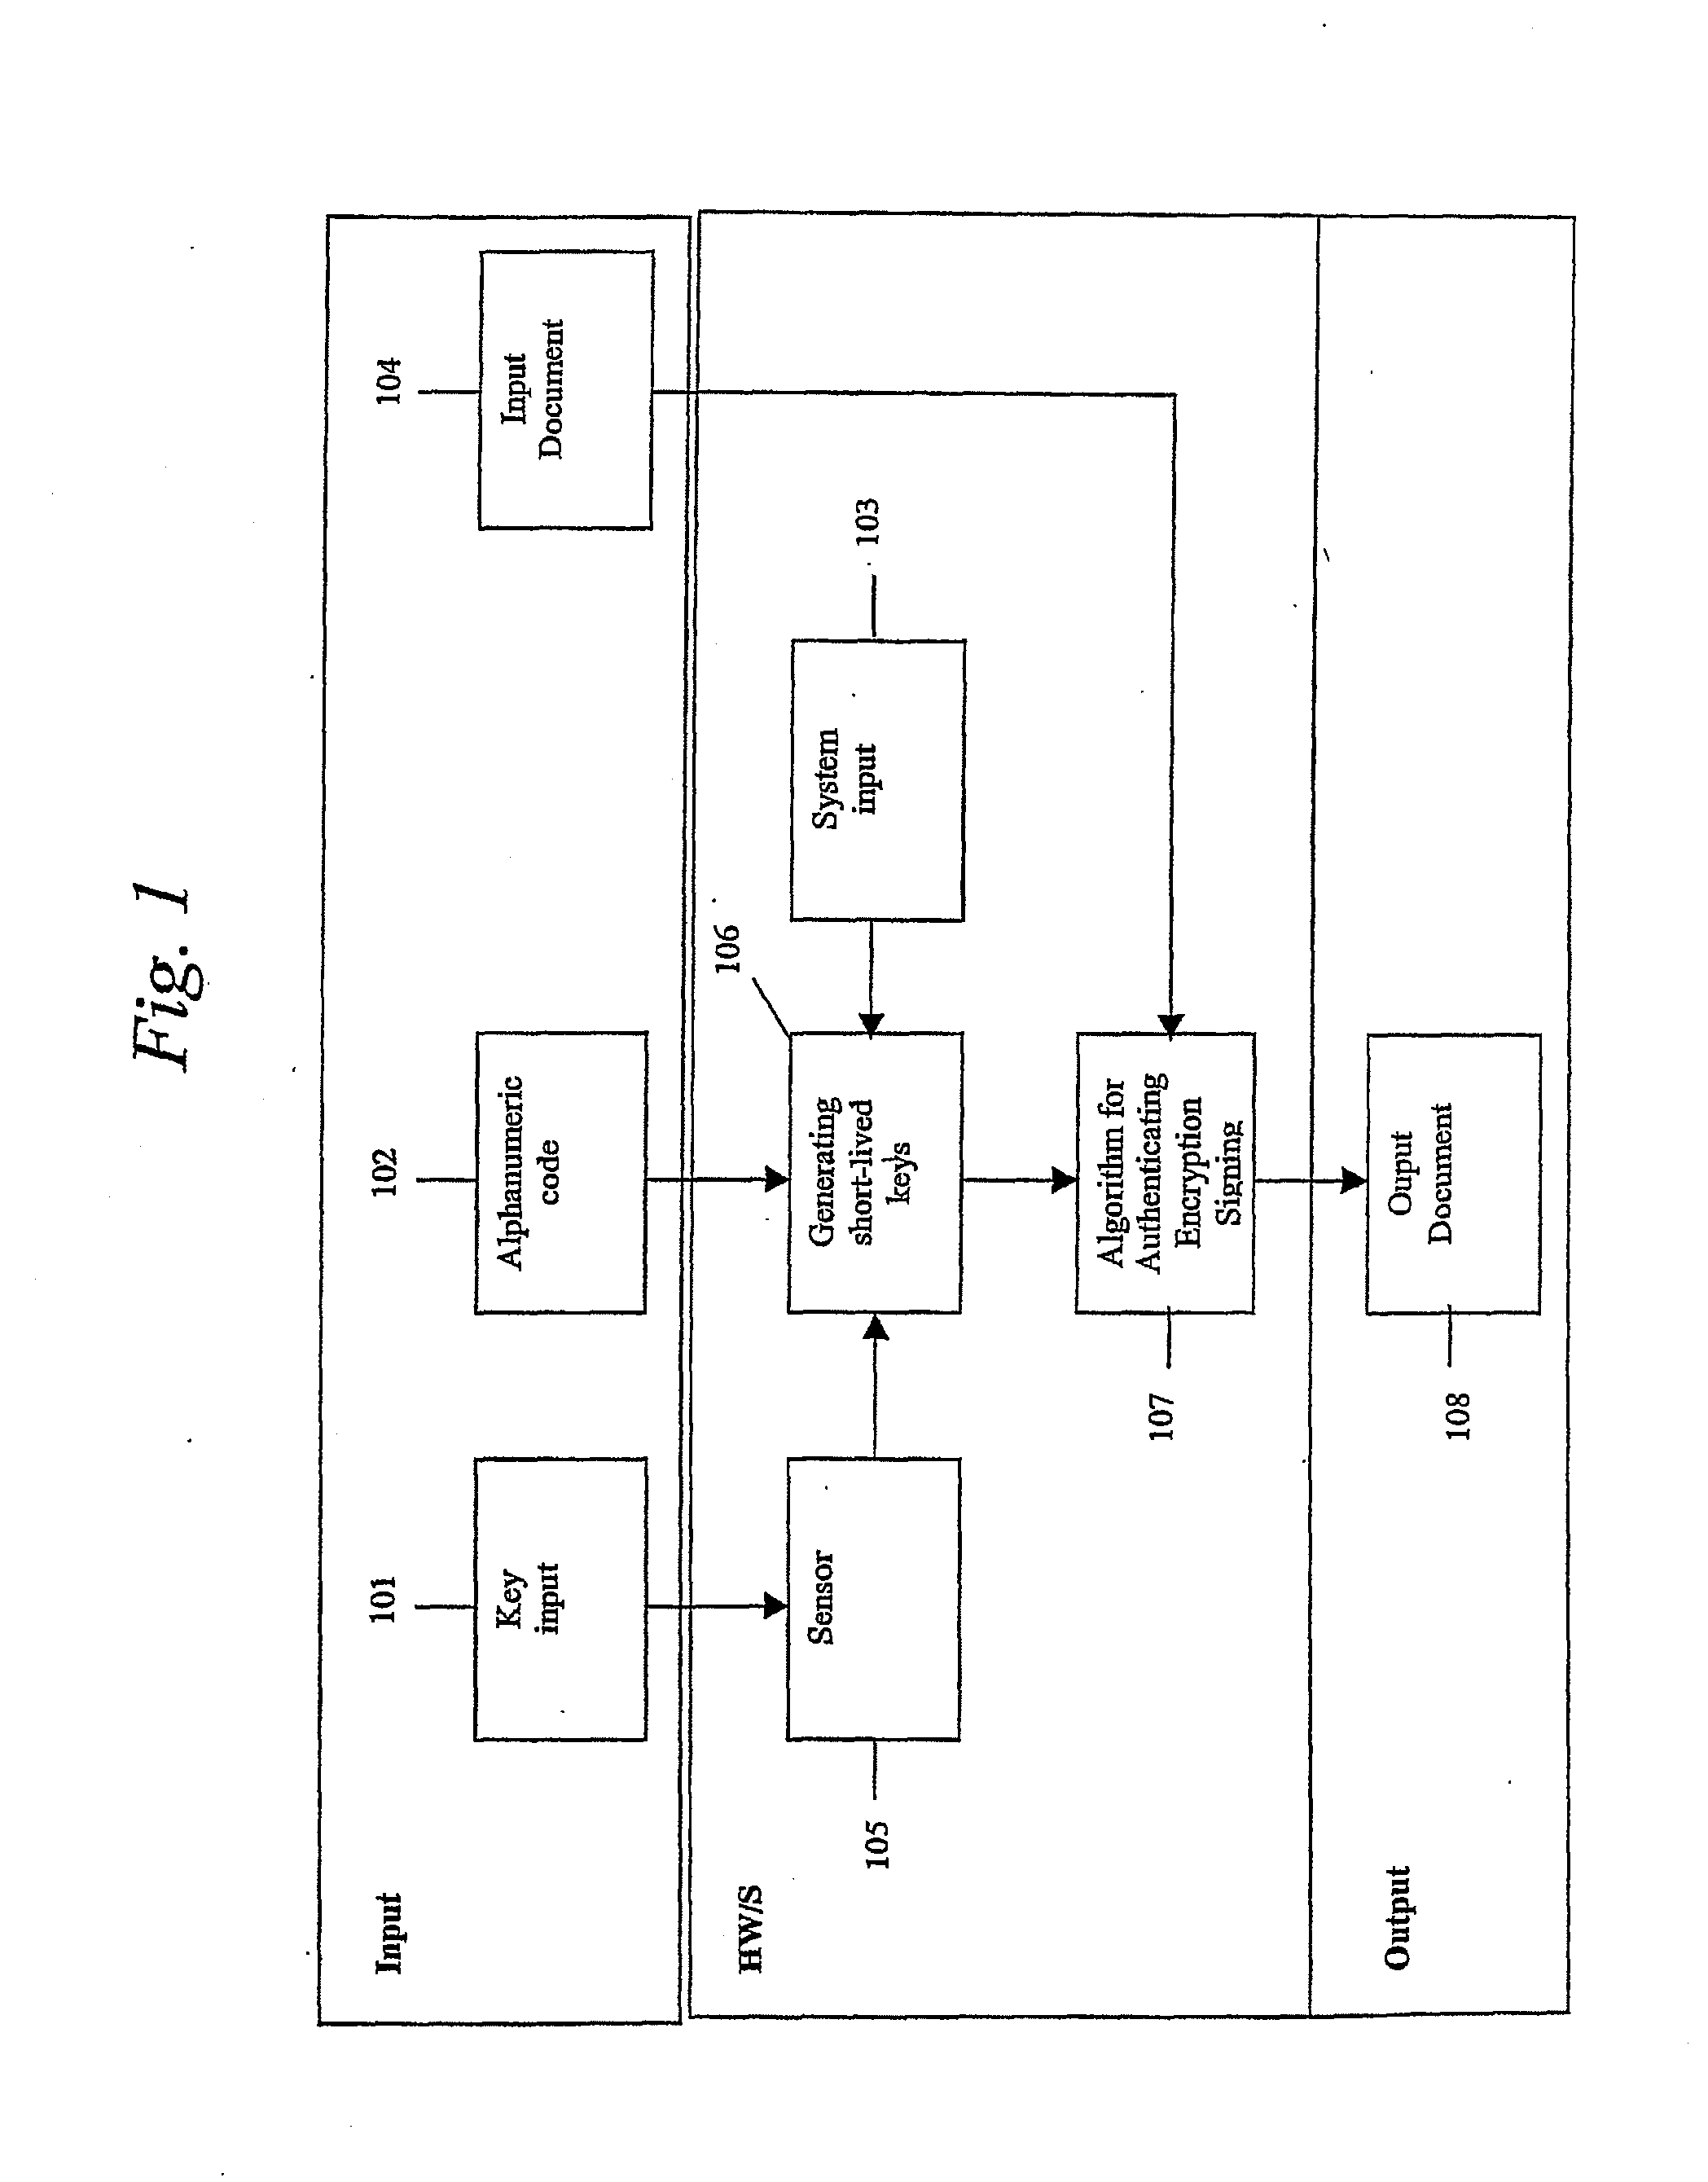 System, portable device and method for digital authenticating, crypting and signing by generating short-lived cryptokeys